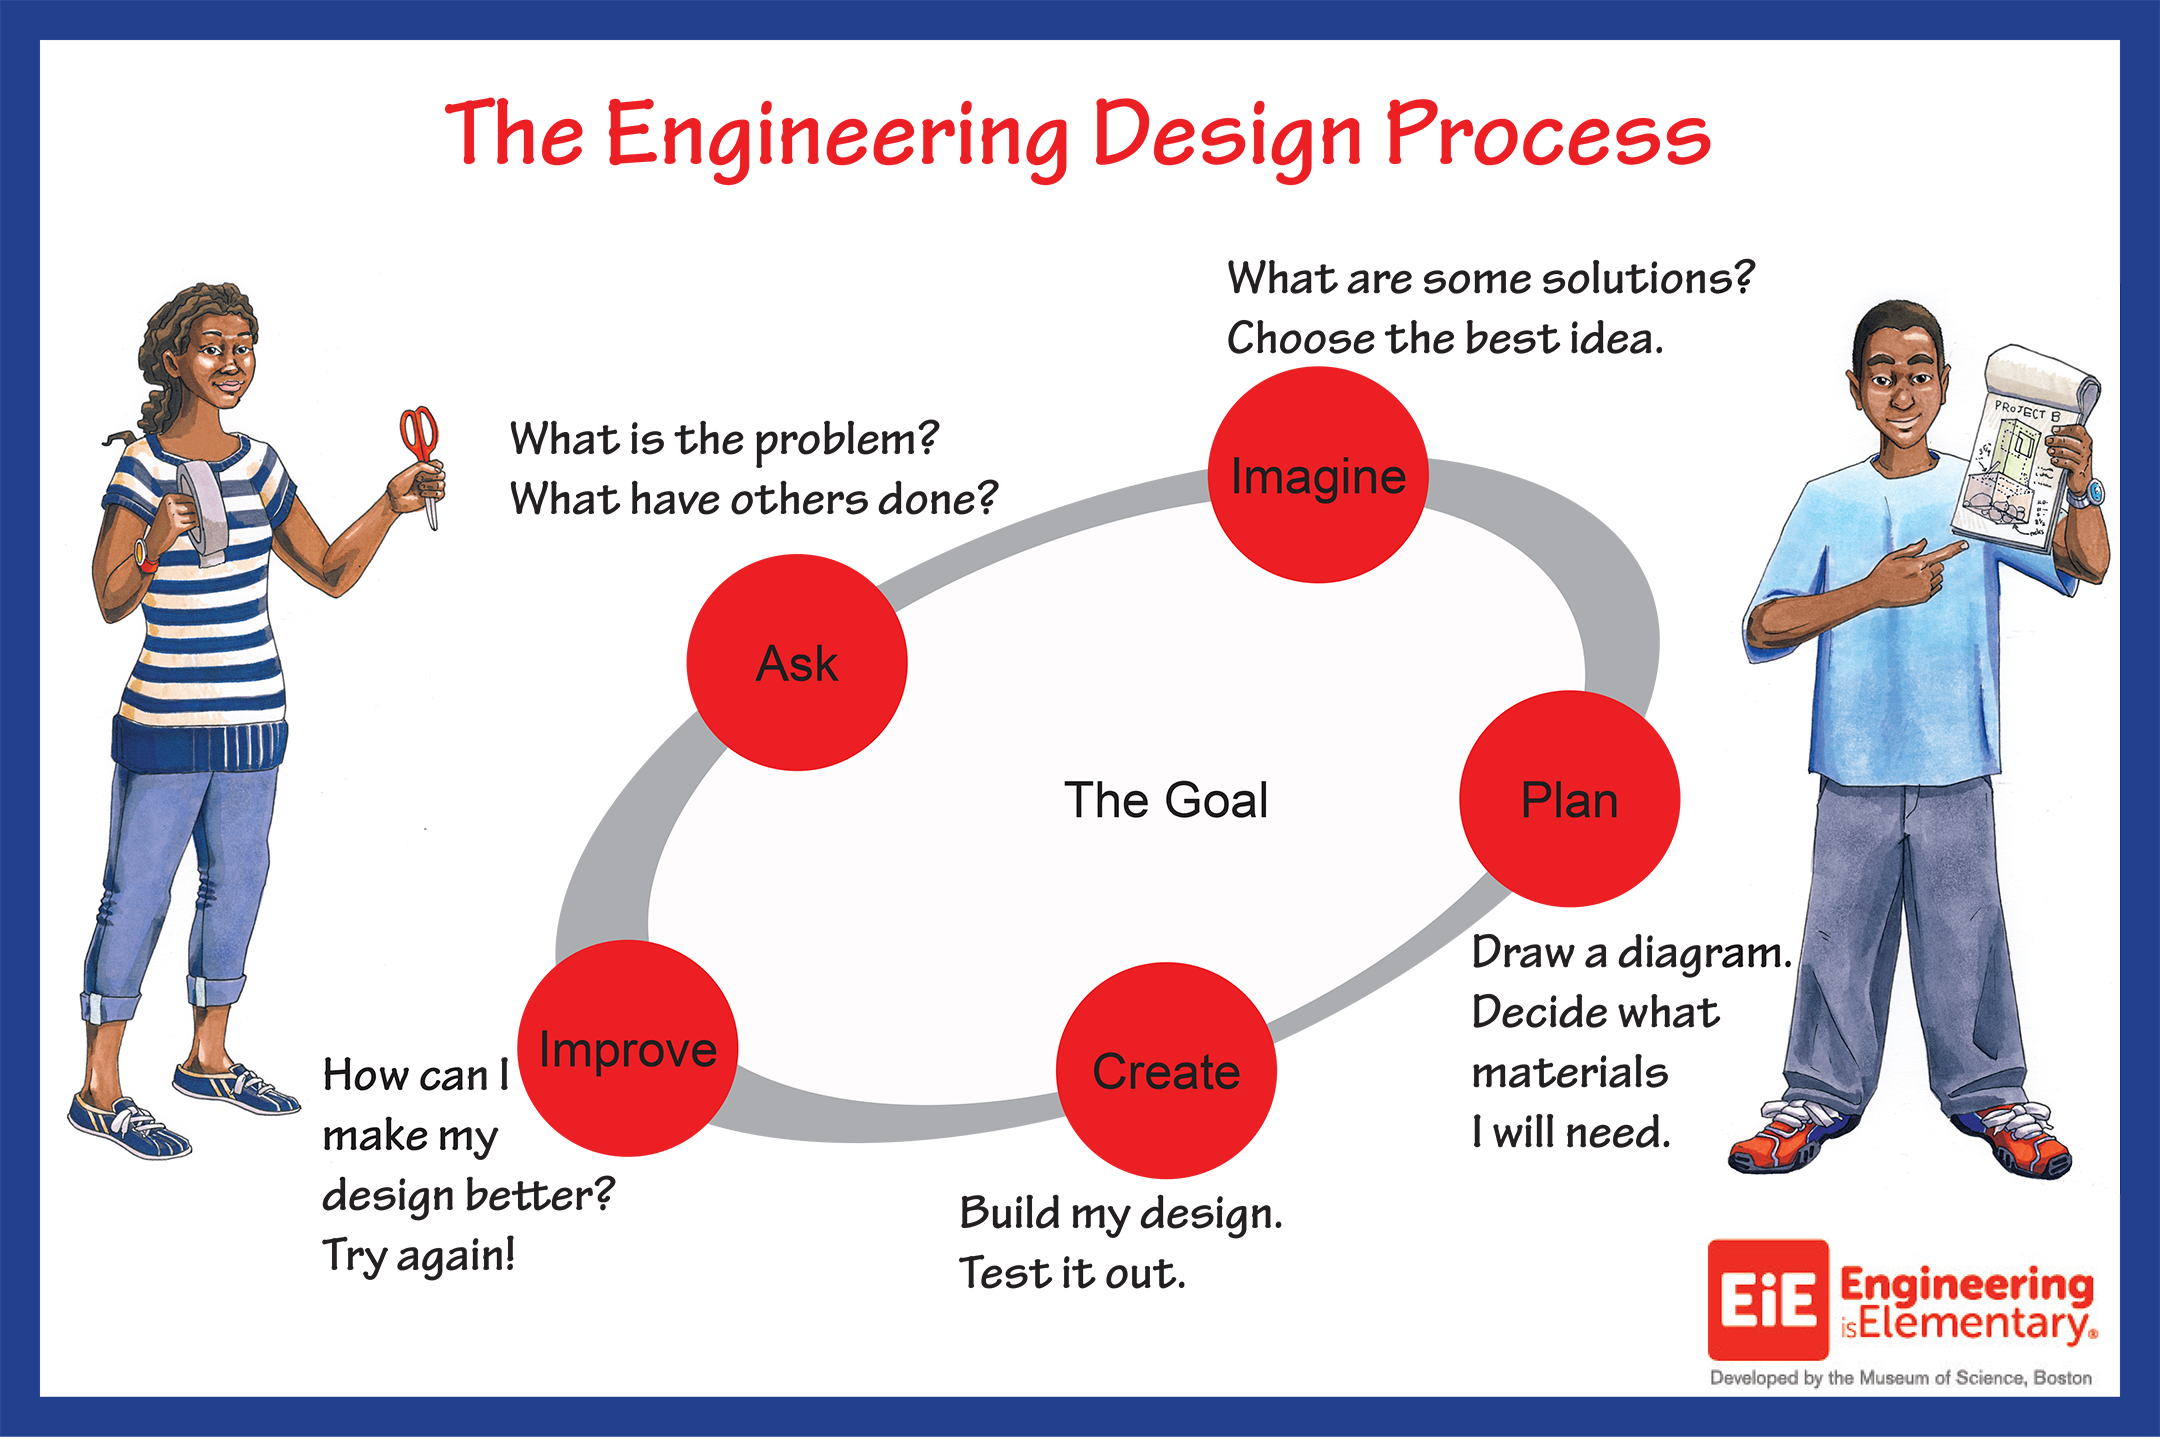 research poster describing the engineering design process